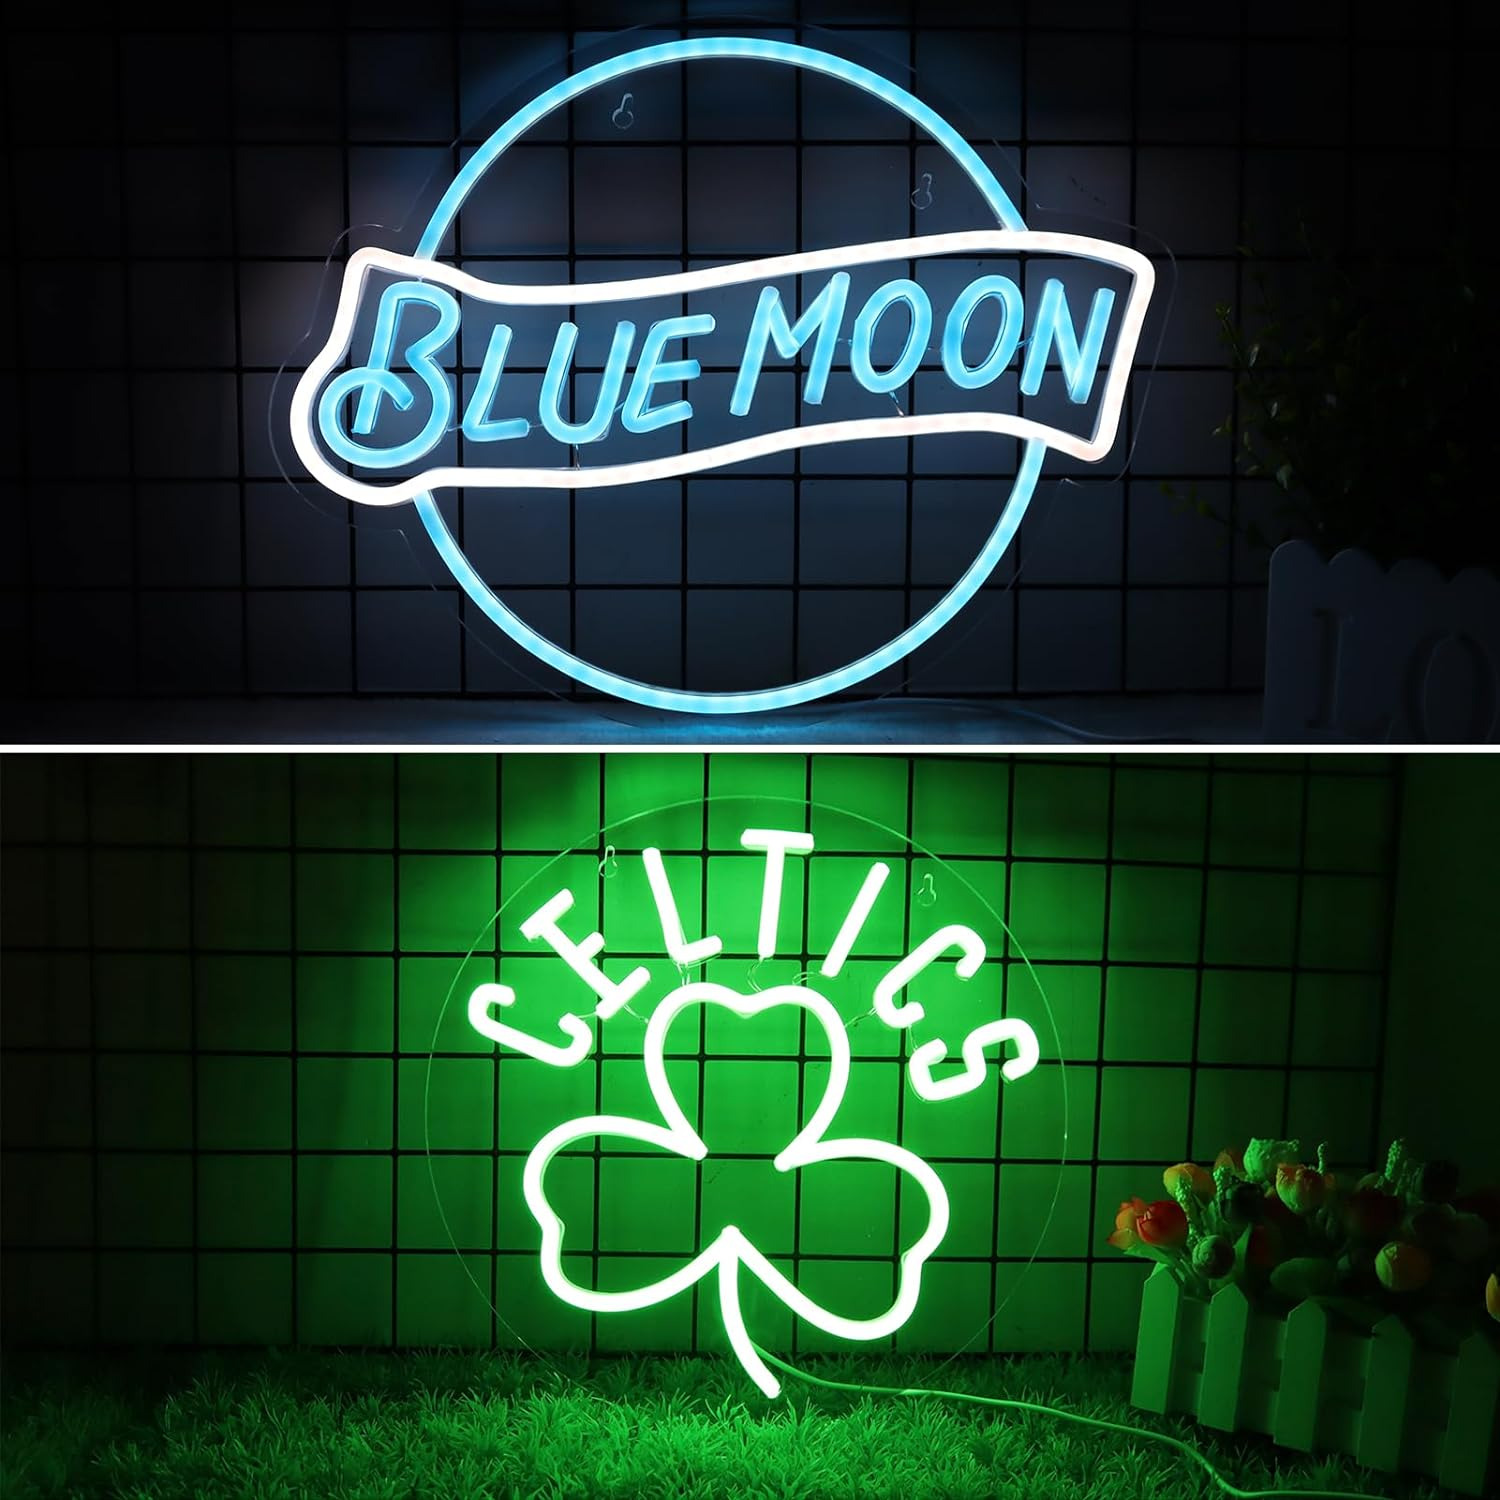 2 Pack Neon Signs 11.8*11.8in Basketball (Celtics) + Beer 16.1*9.5in (Blue Moon)